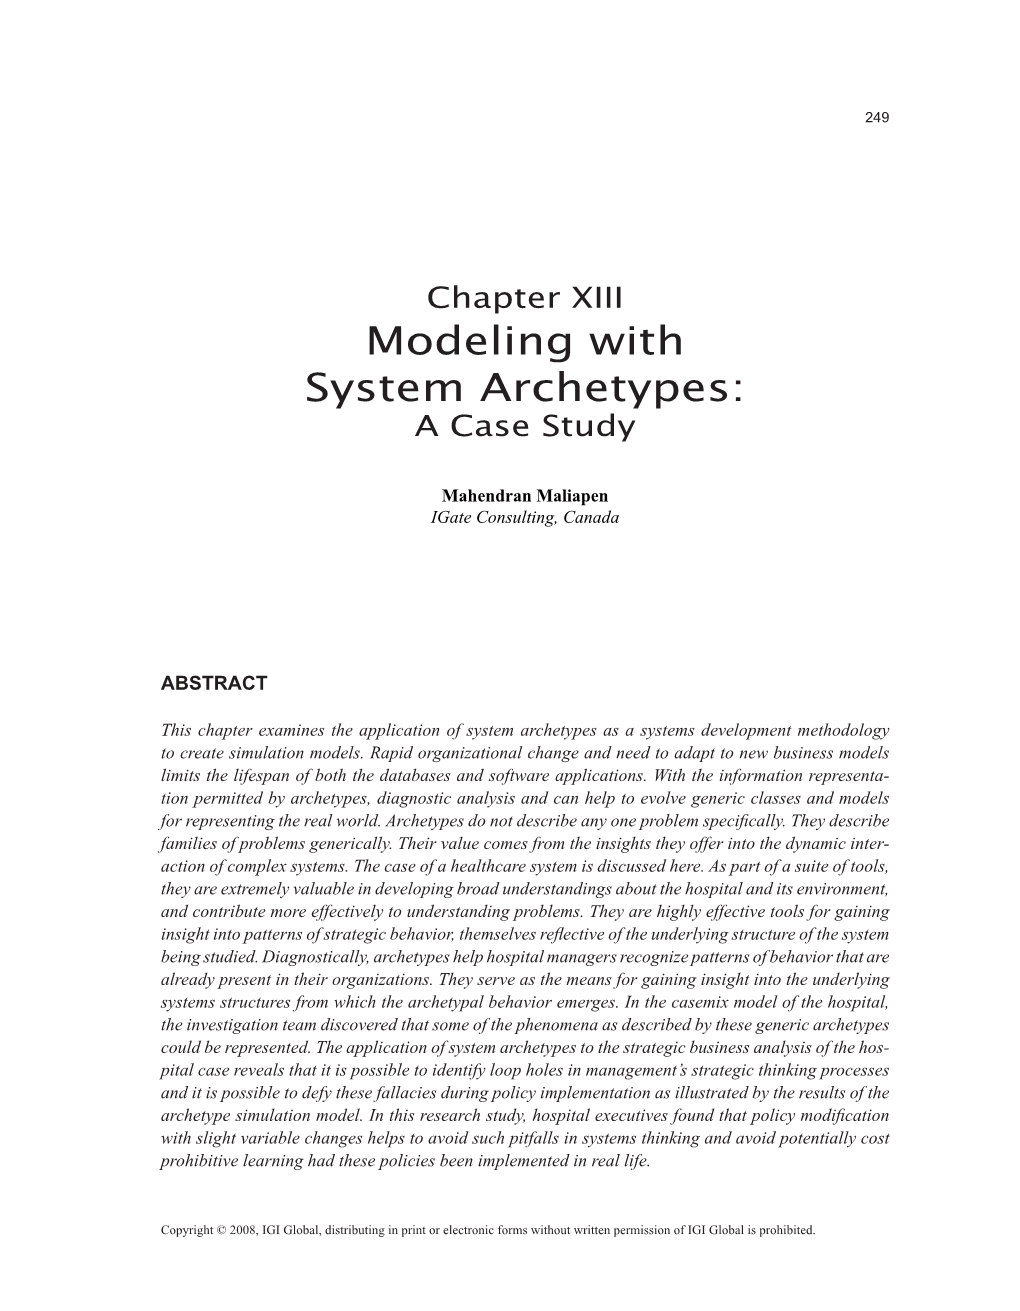 Chapter XIII Modeling with System Archetypes: a Case Study